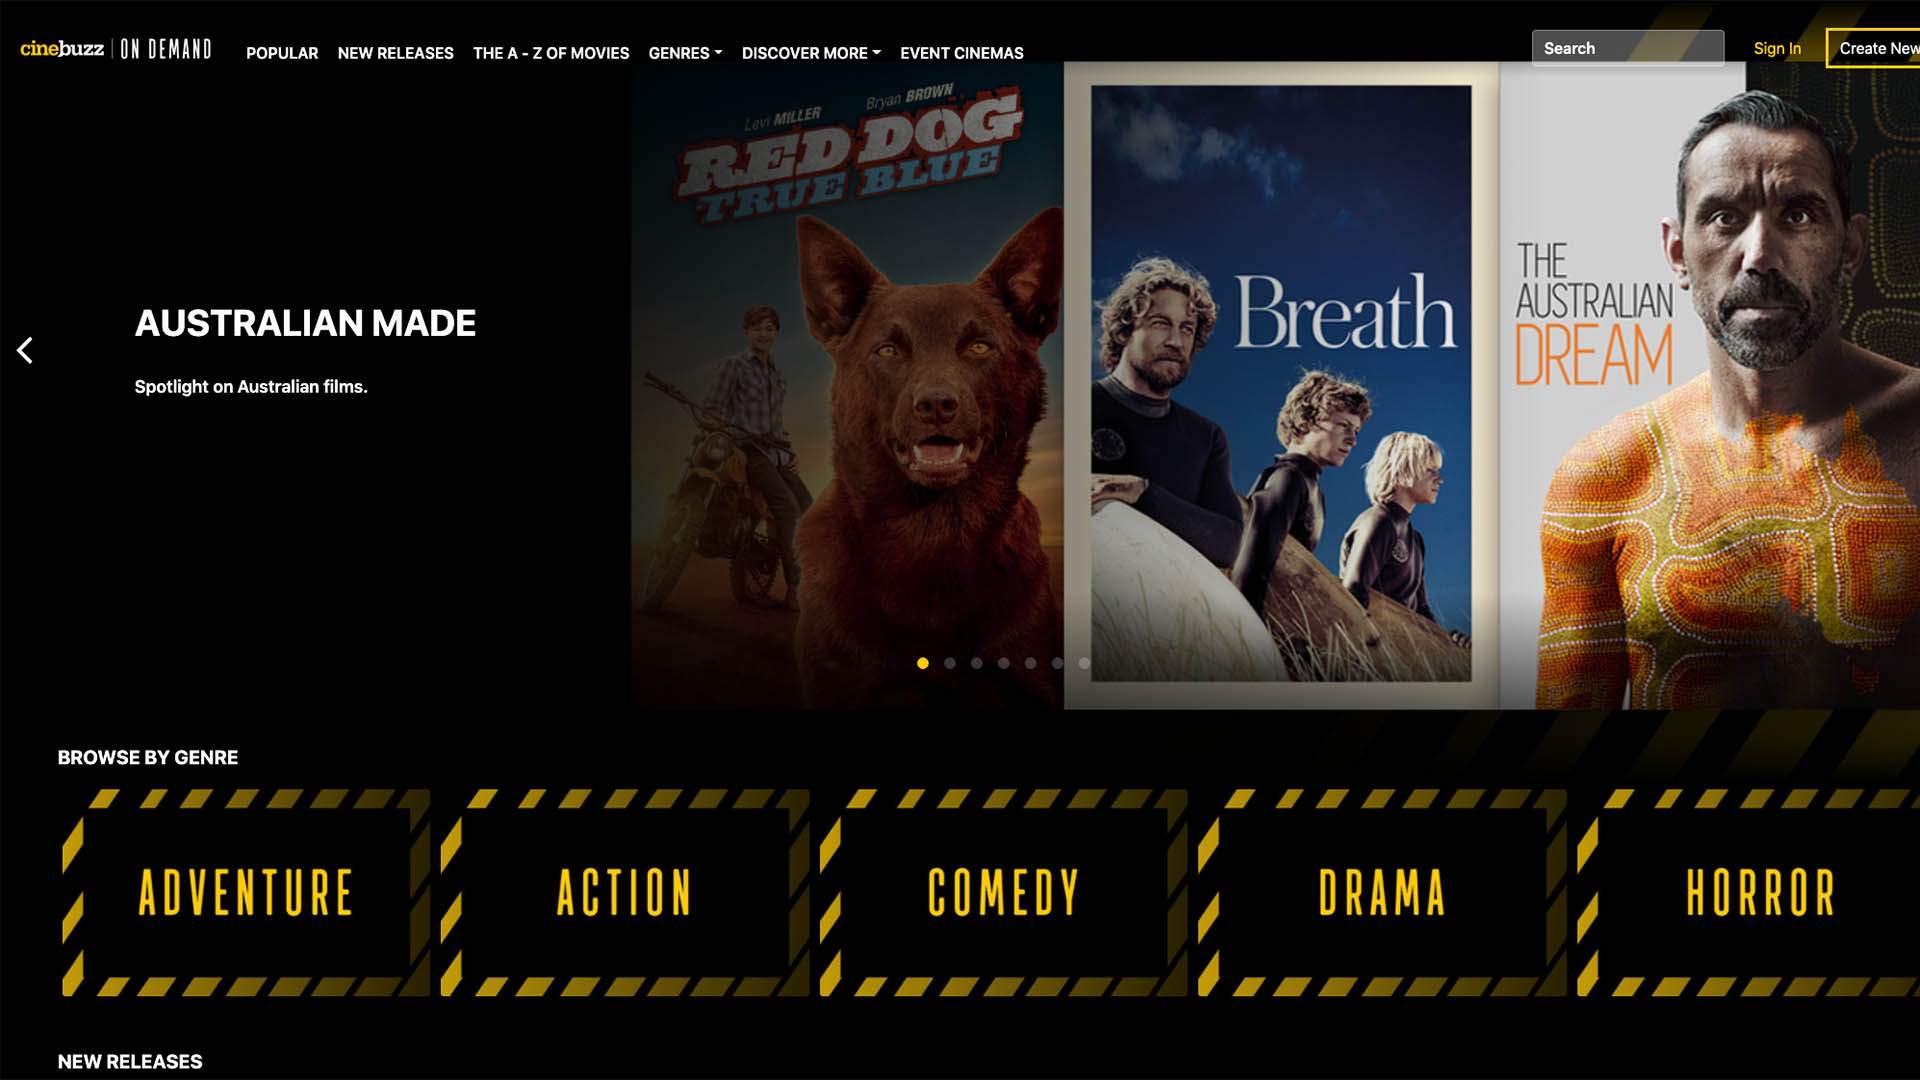 Event Cinemas Is the Latest Australian Movie Theatre Chain to Launch Its Own Streaming Service